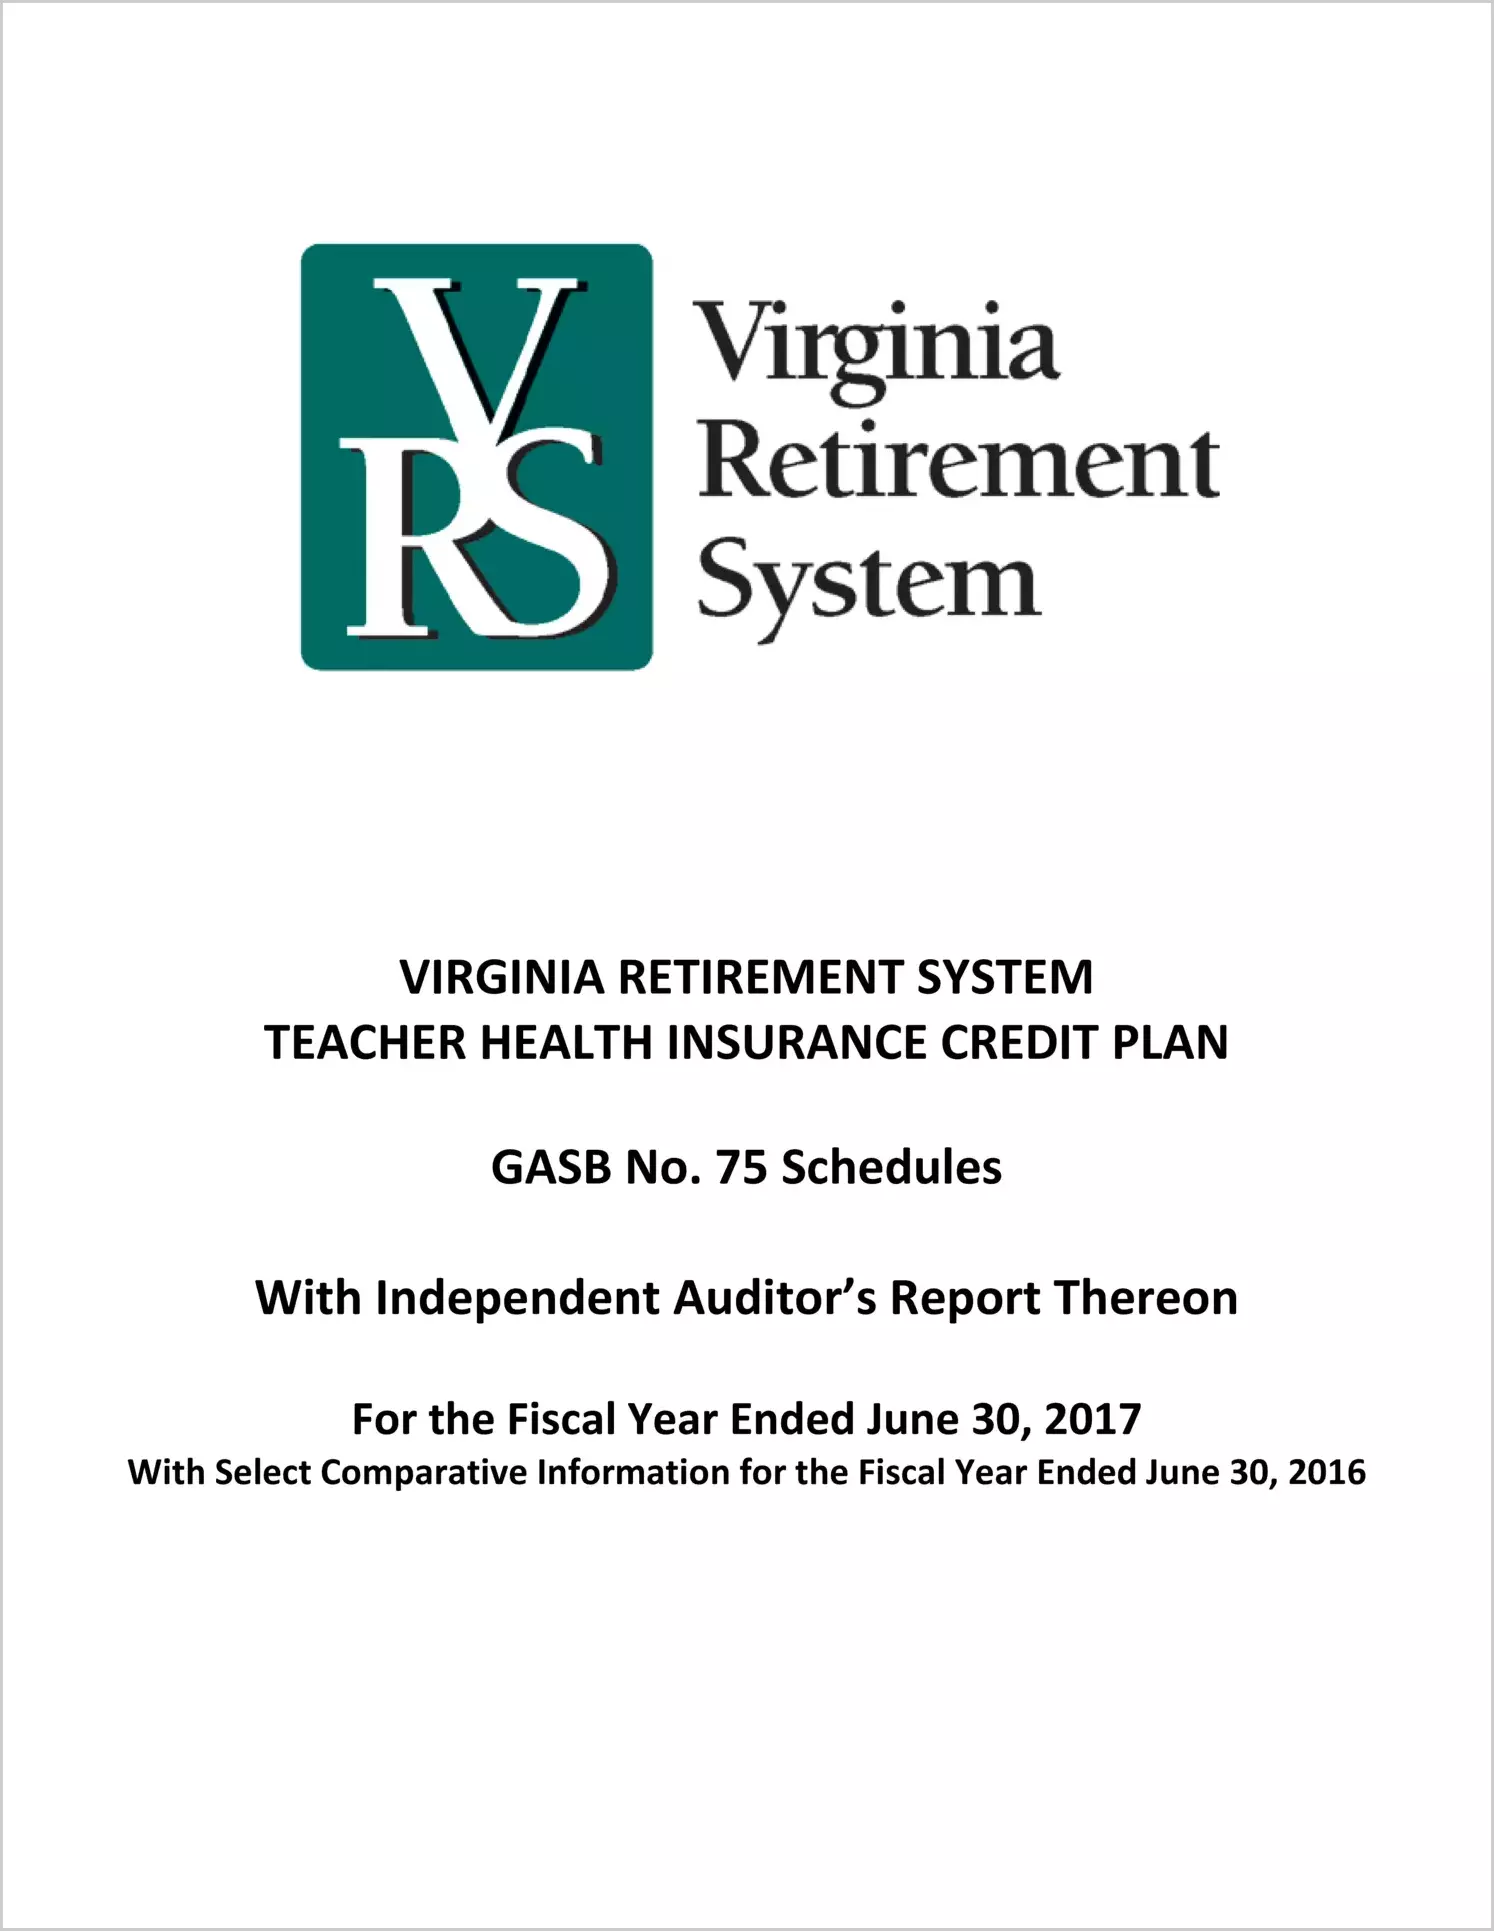 GASB 75 Schedule - Teacher Health Insurance Credit Plan OPEB for the year ended June 30, 2017